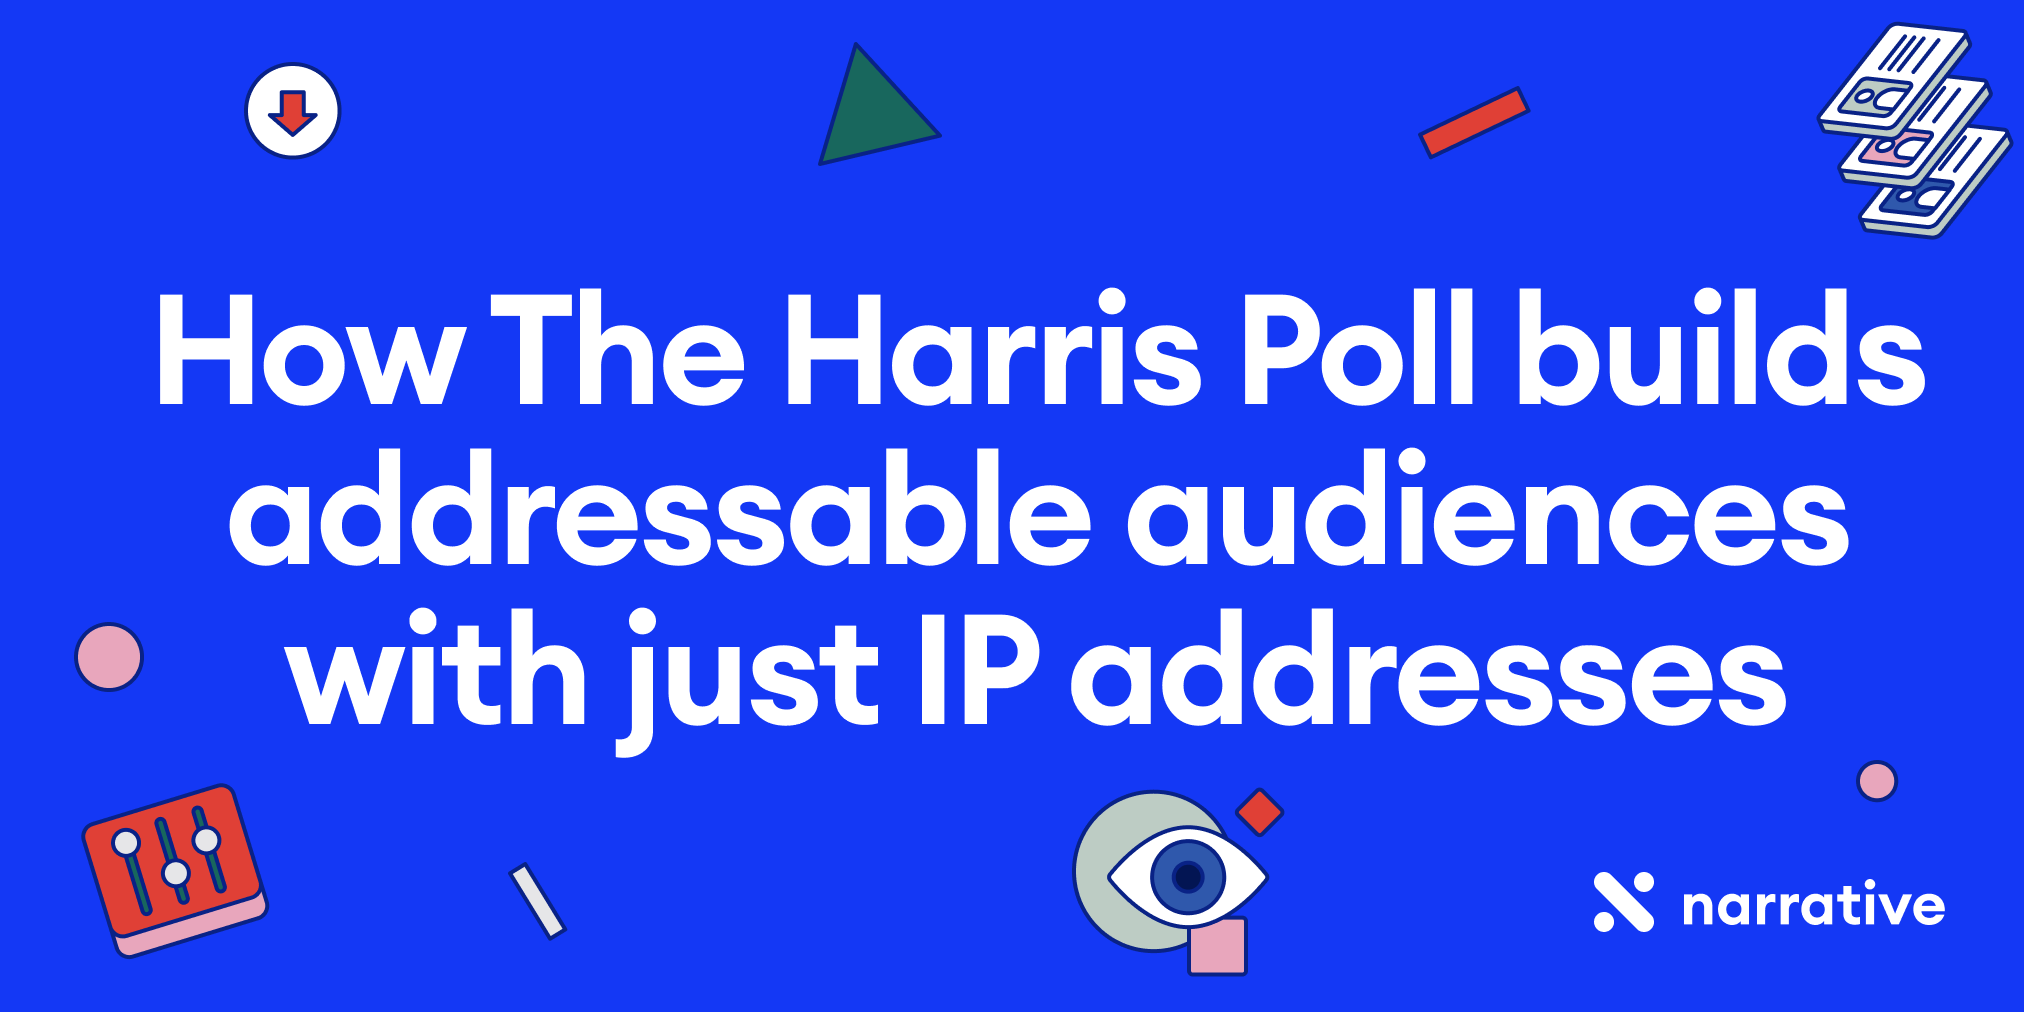 How The Harris Poll builds addressable audiences with just IP addresses